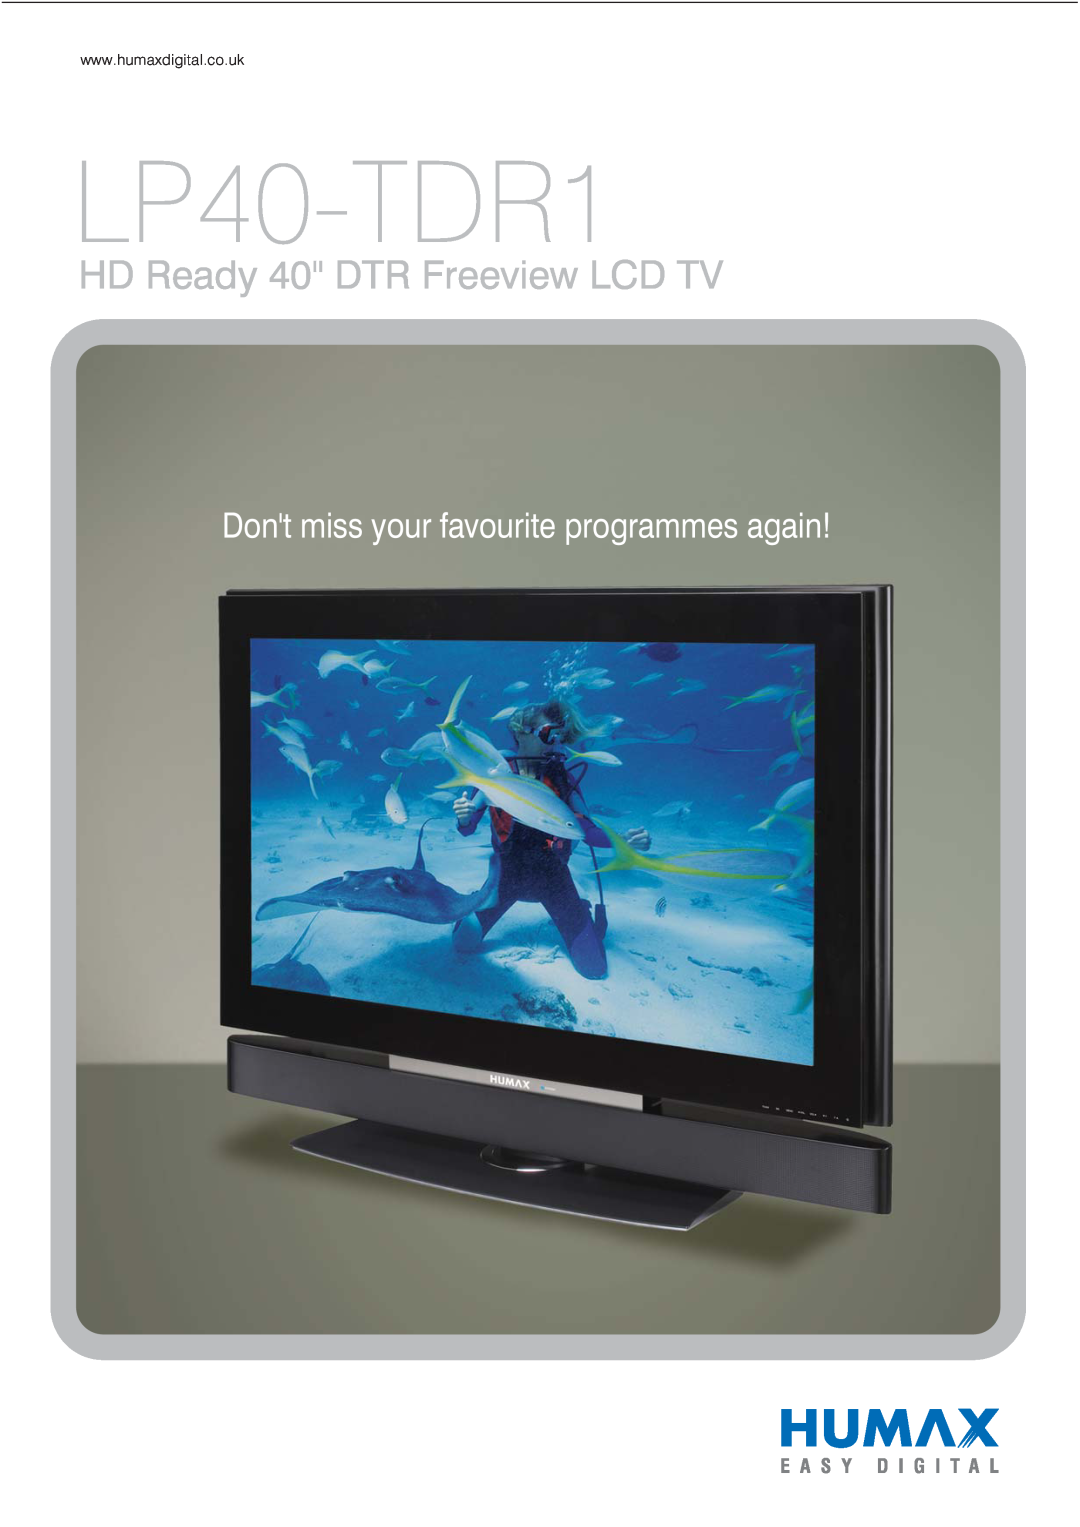 Humax LP40-TDR1 manual HD Ready 40 DTR Freeview LCD TV, Dont miss your favourite programmes again 